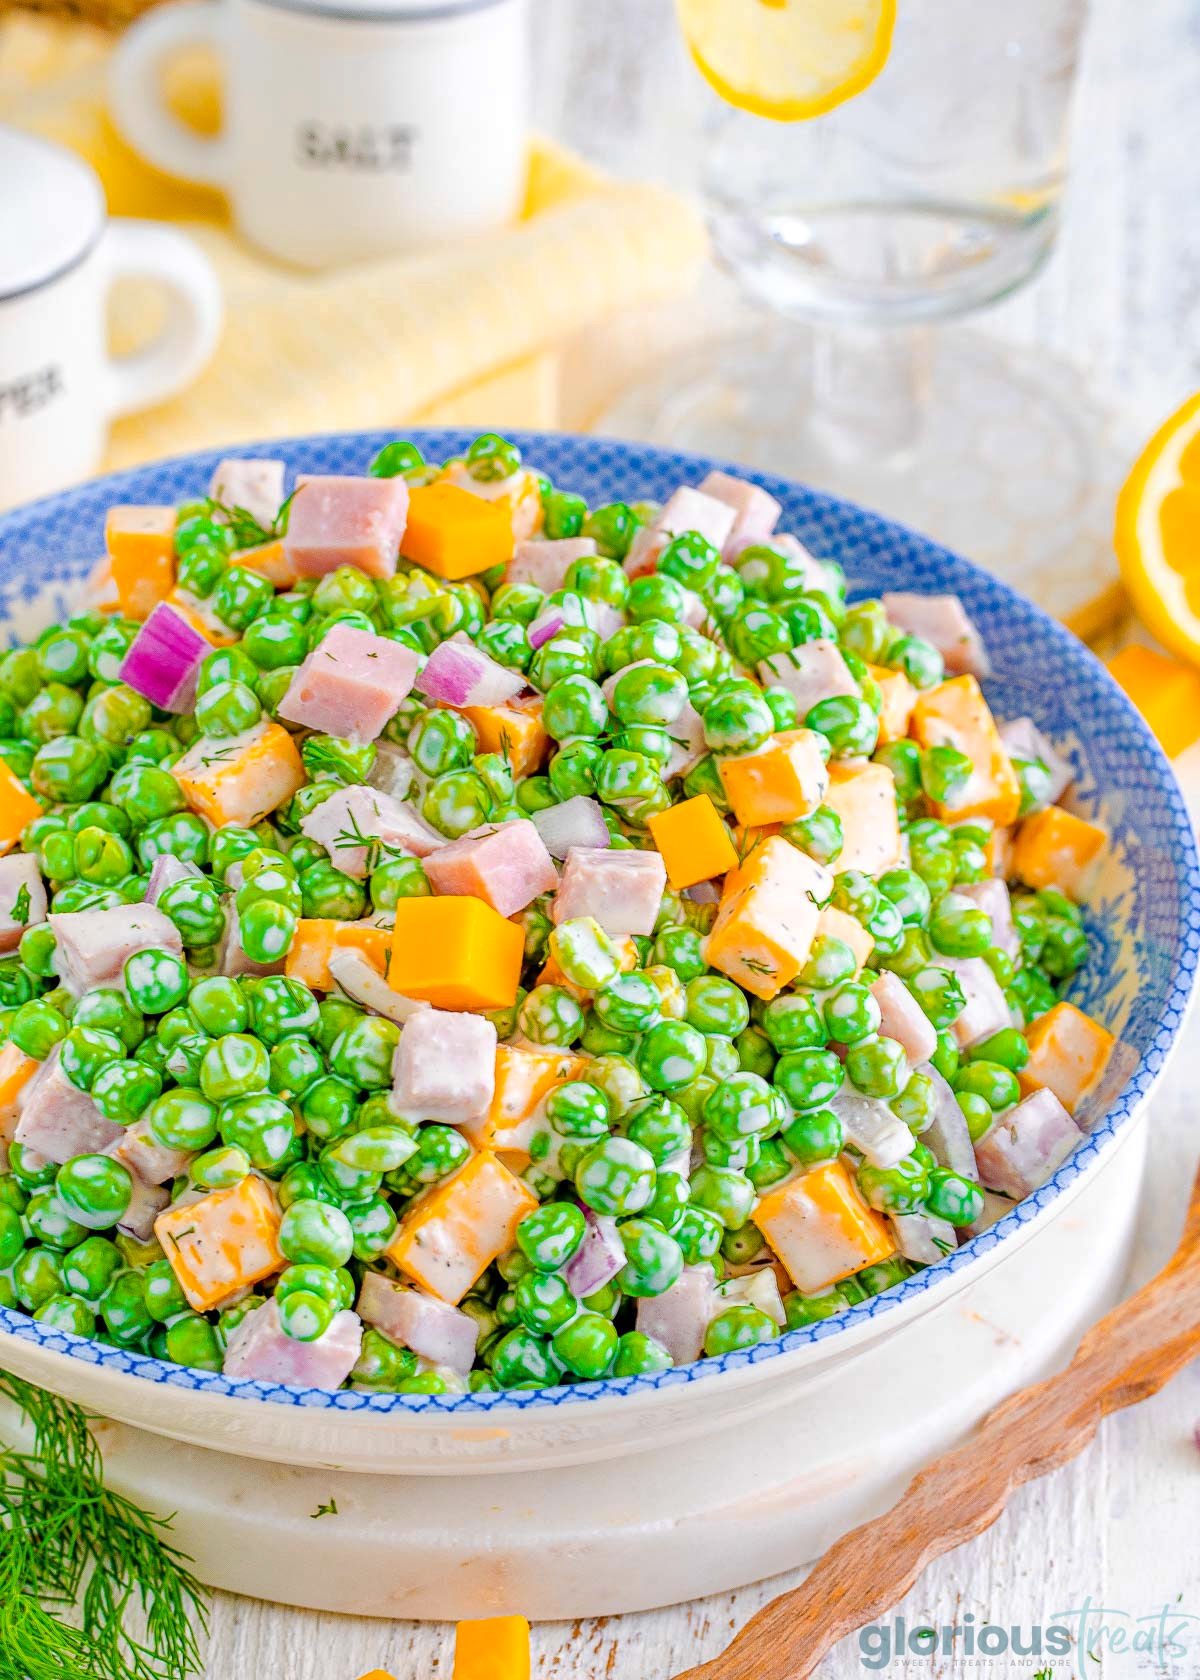 pea salad recipe made with cheddar cheese and ham in a white and blue bowl.